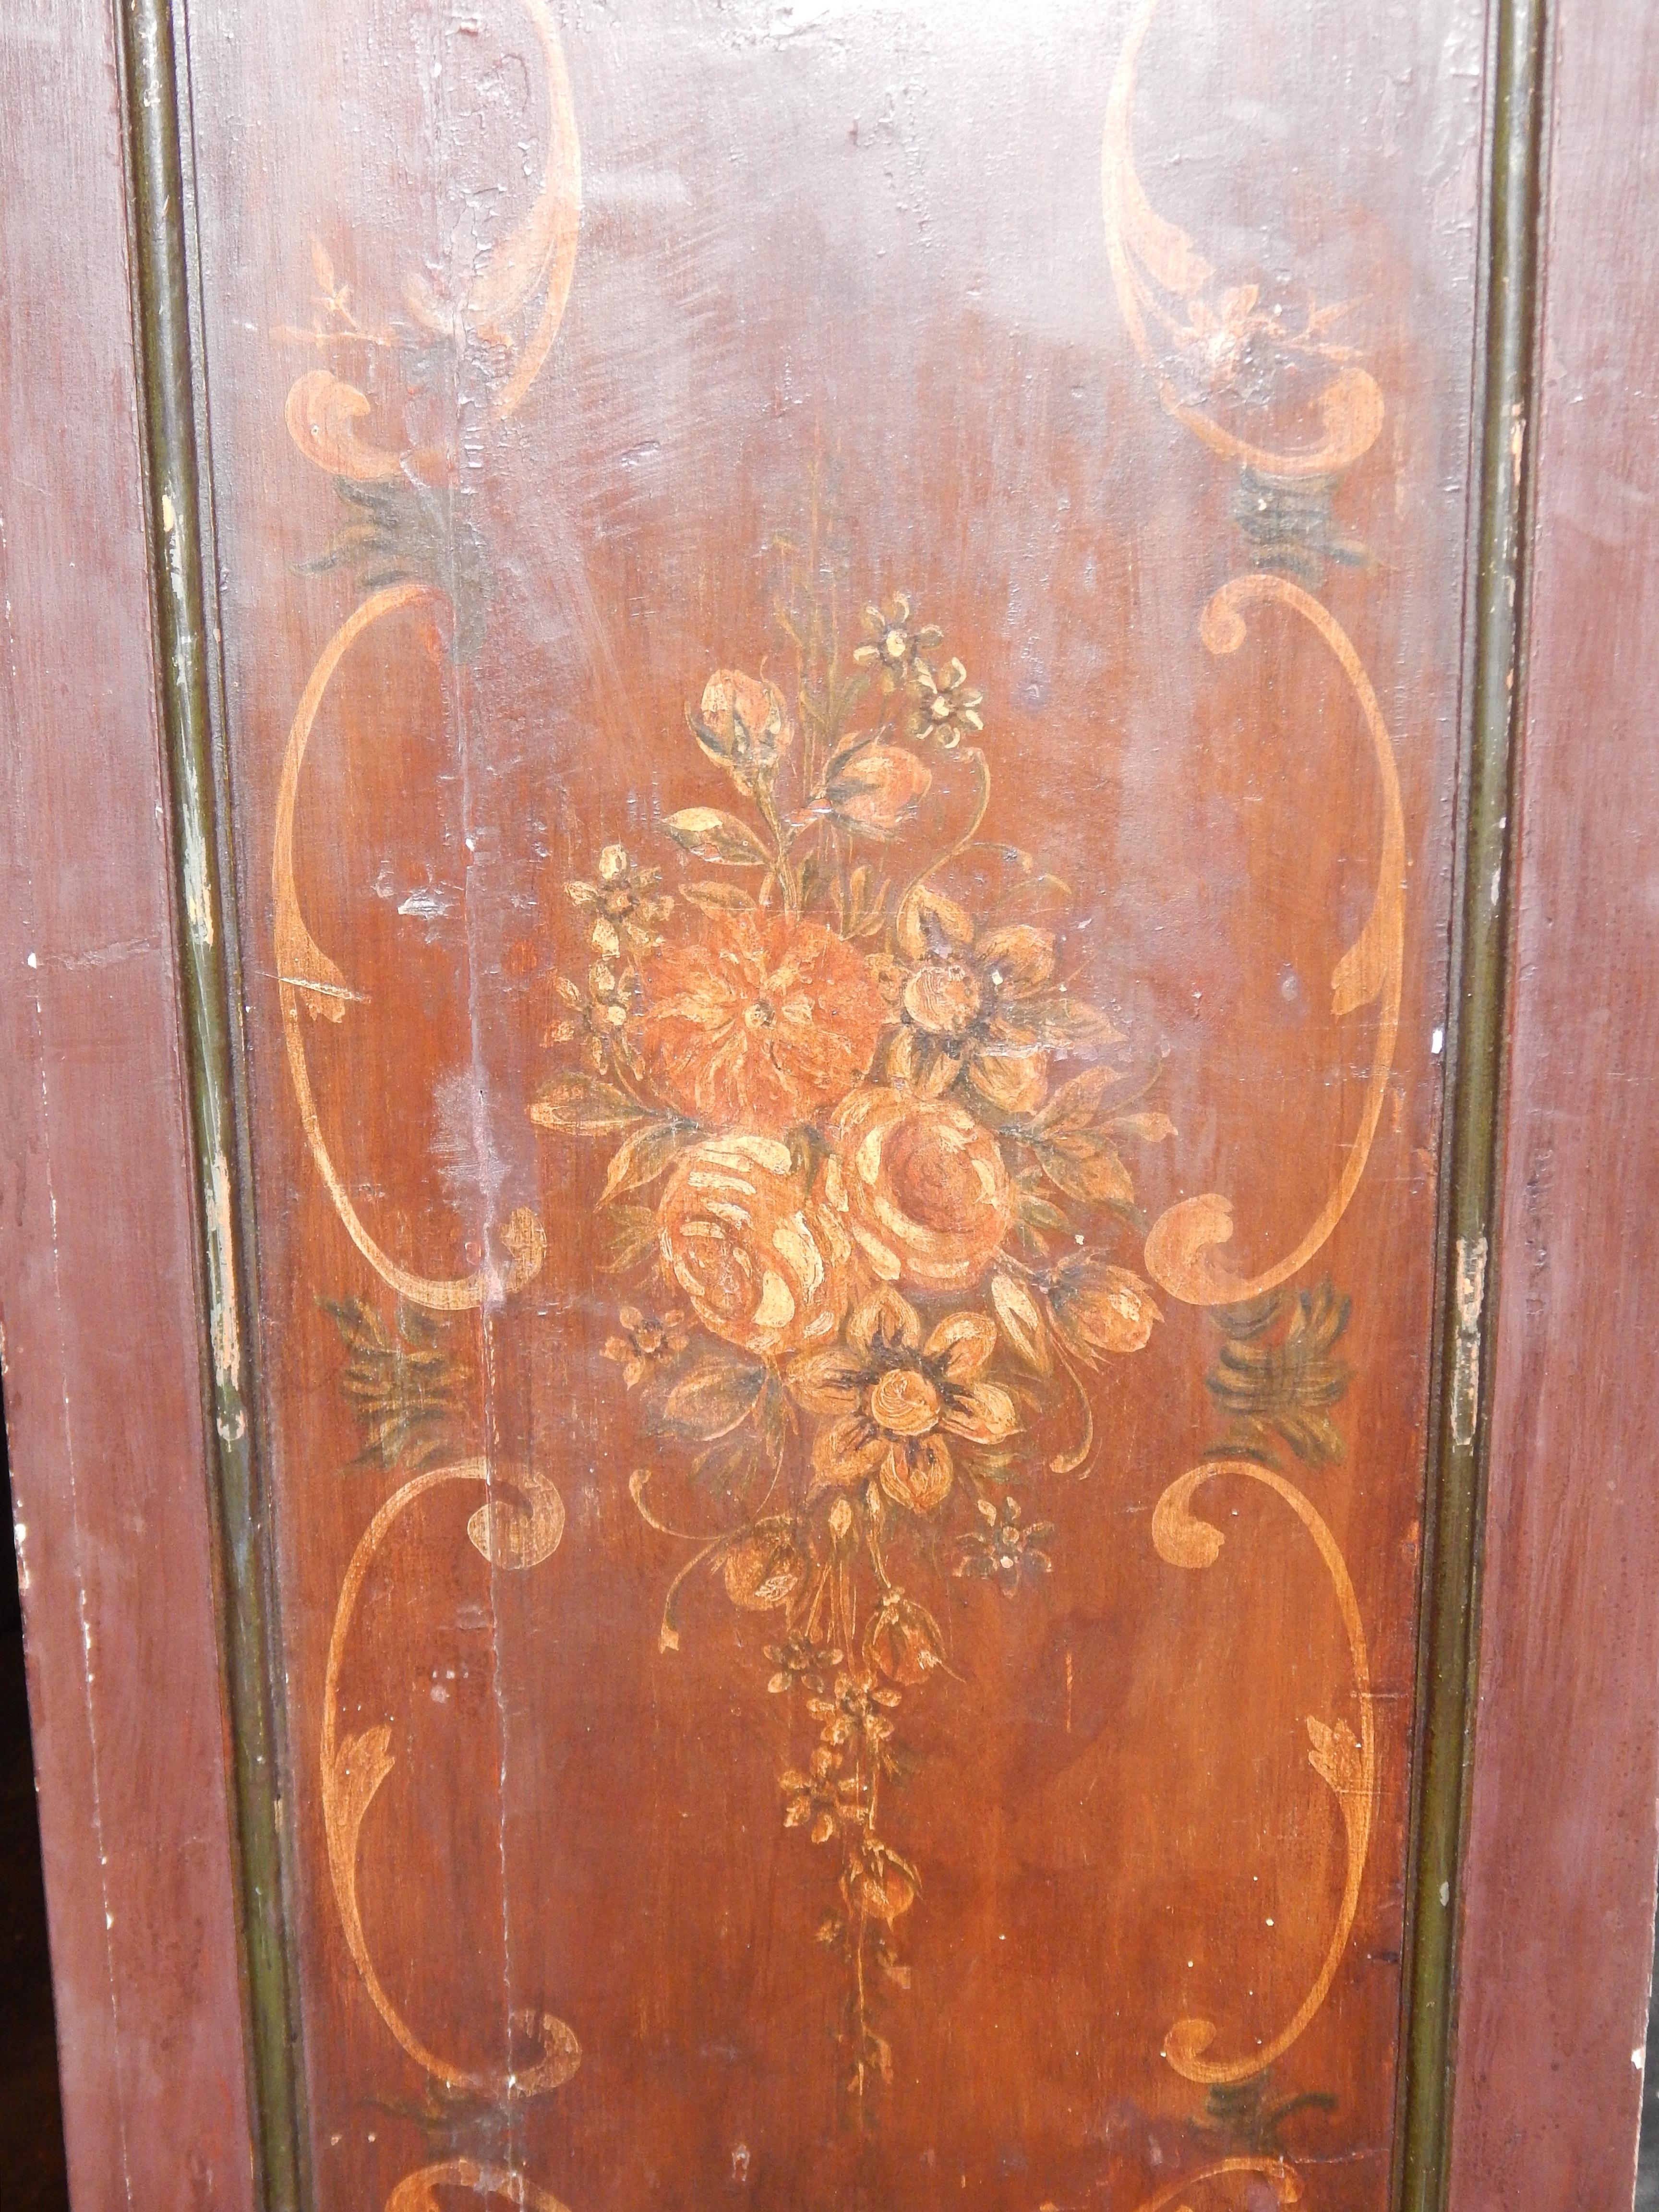 19th Century Lacquered Wardrobe with Floral Motifs (Lackiert) im Angebot